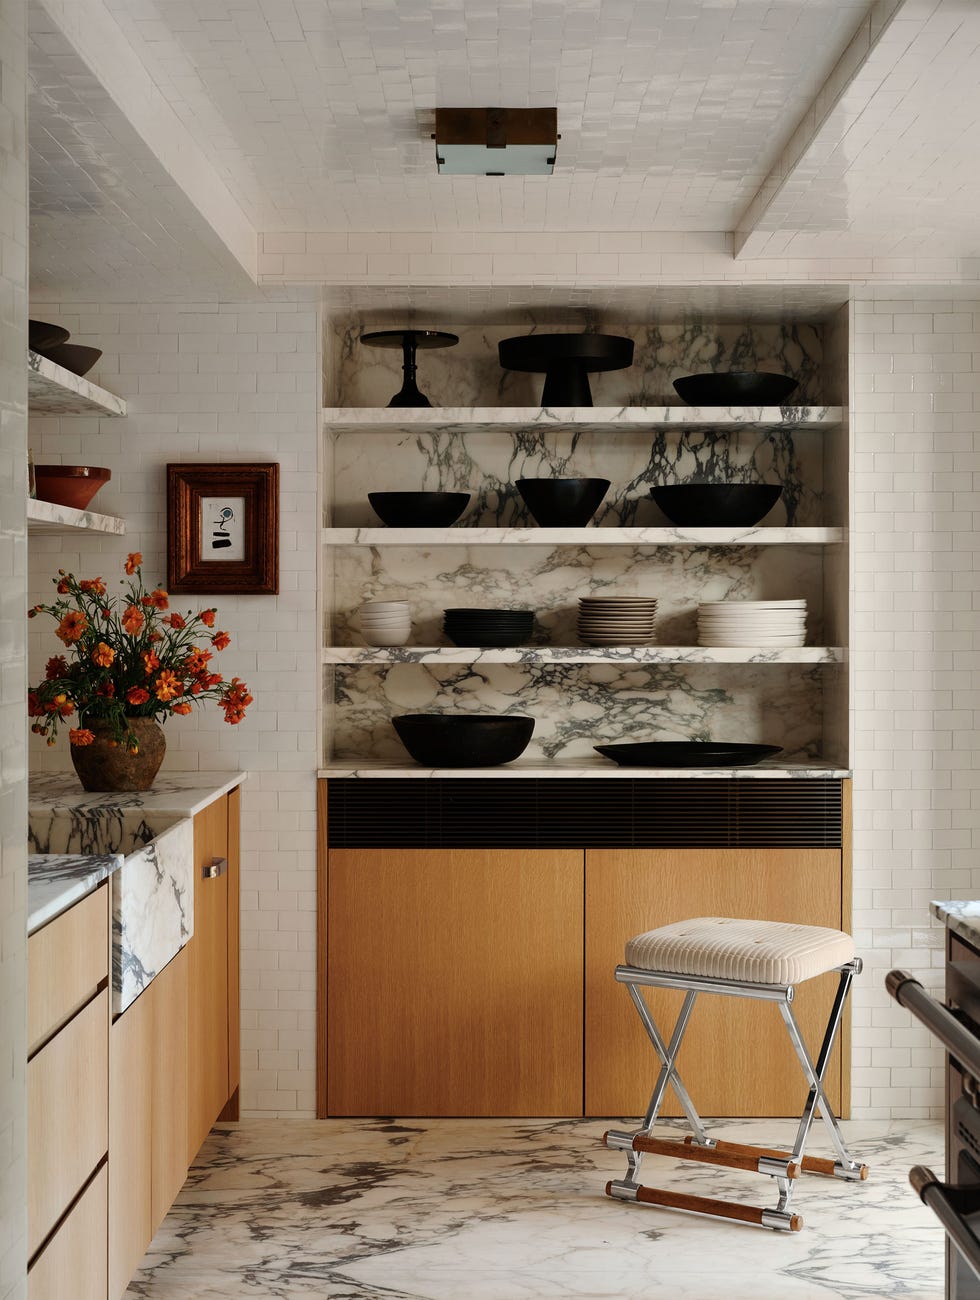 Kitchen walls feature white subway tile, light marble recessed open shelves with dark veining to showcase black and white tableware, light wood cabinets with marble sink and countertops, marble flooring, square ceiling lights